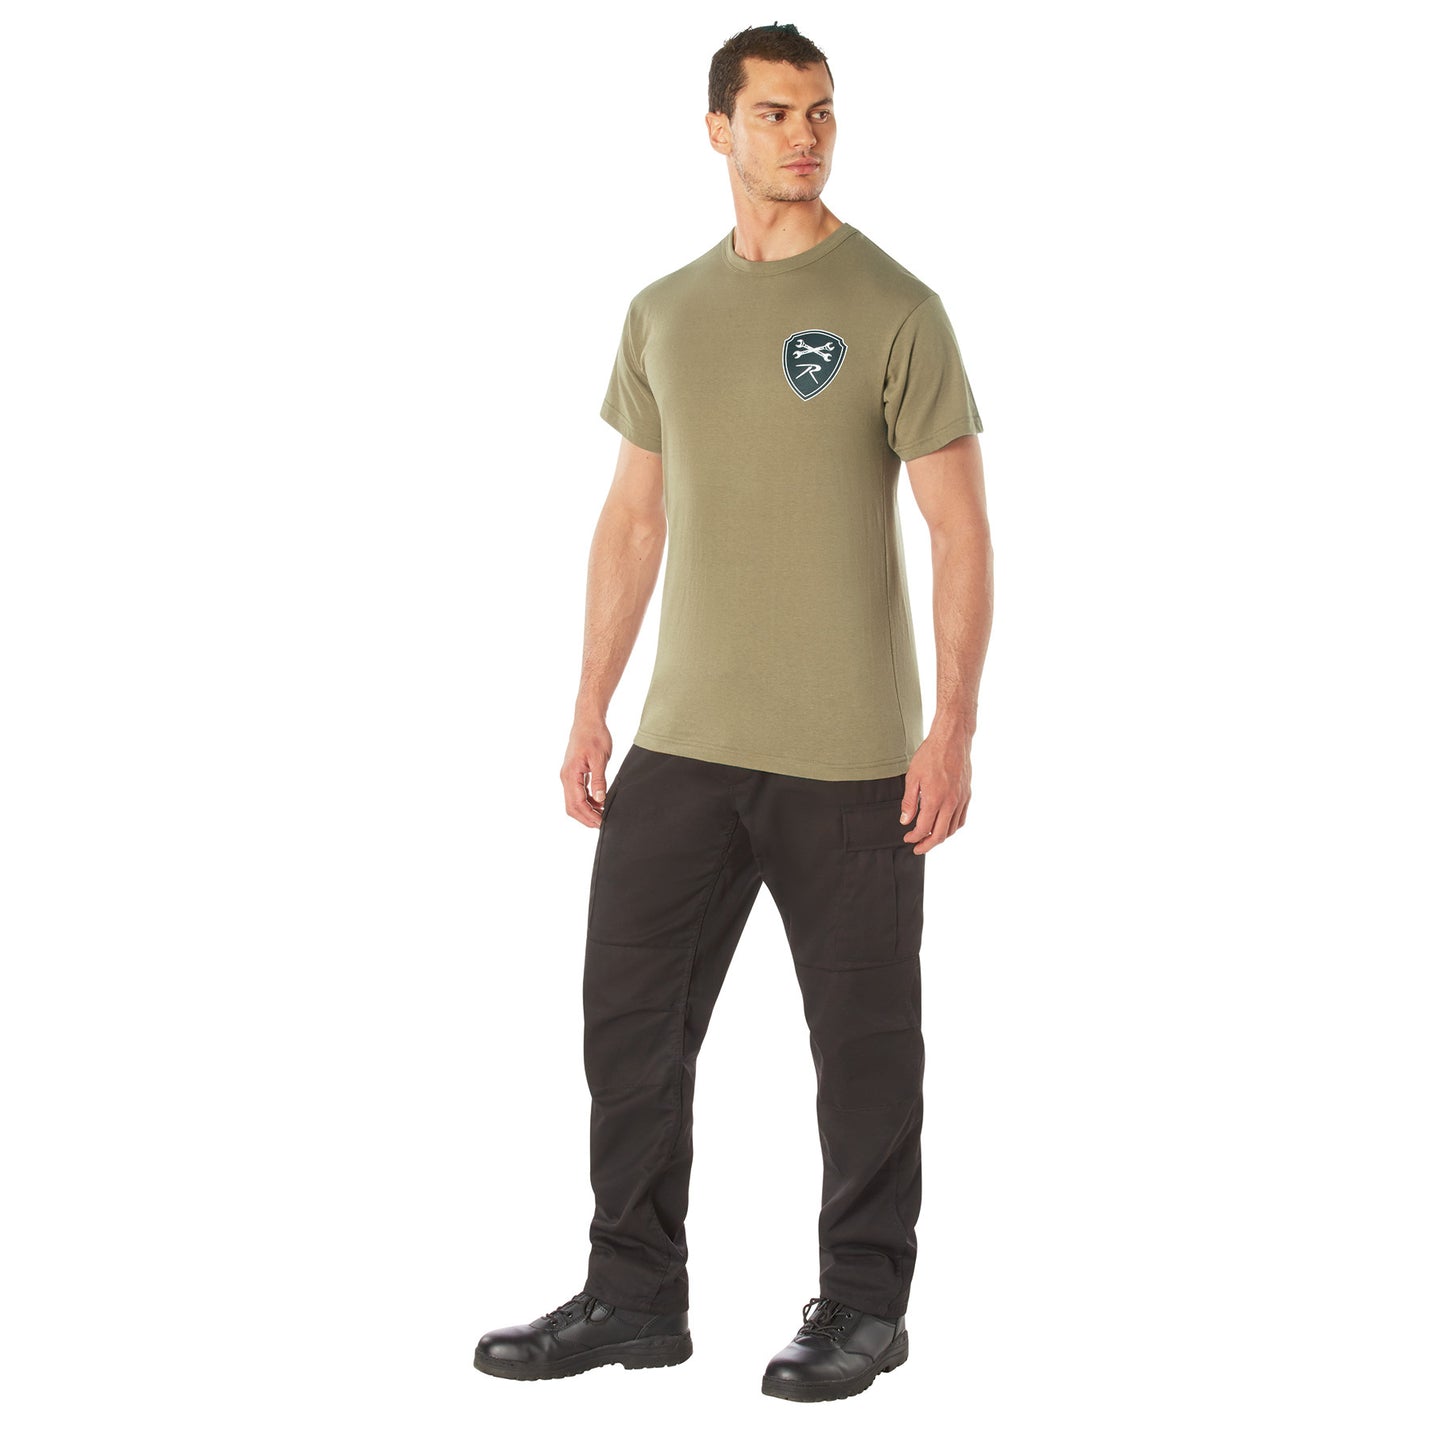 Rothco Workwear Tee WWI Bottle Cap T-Shirt